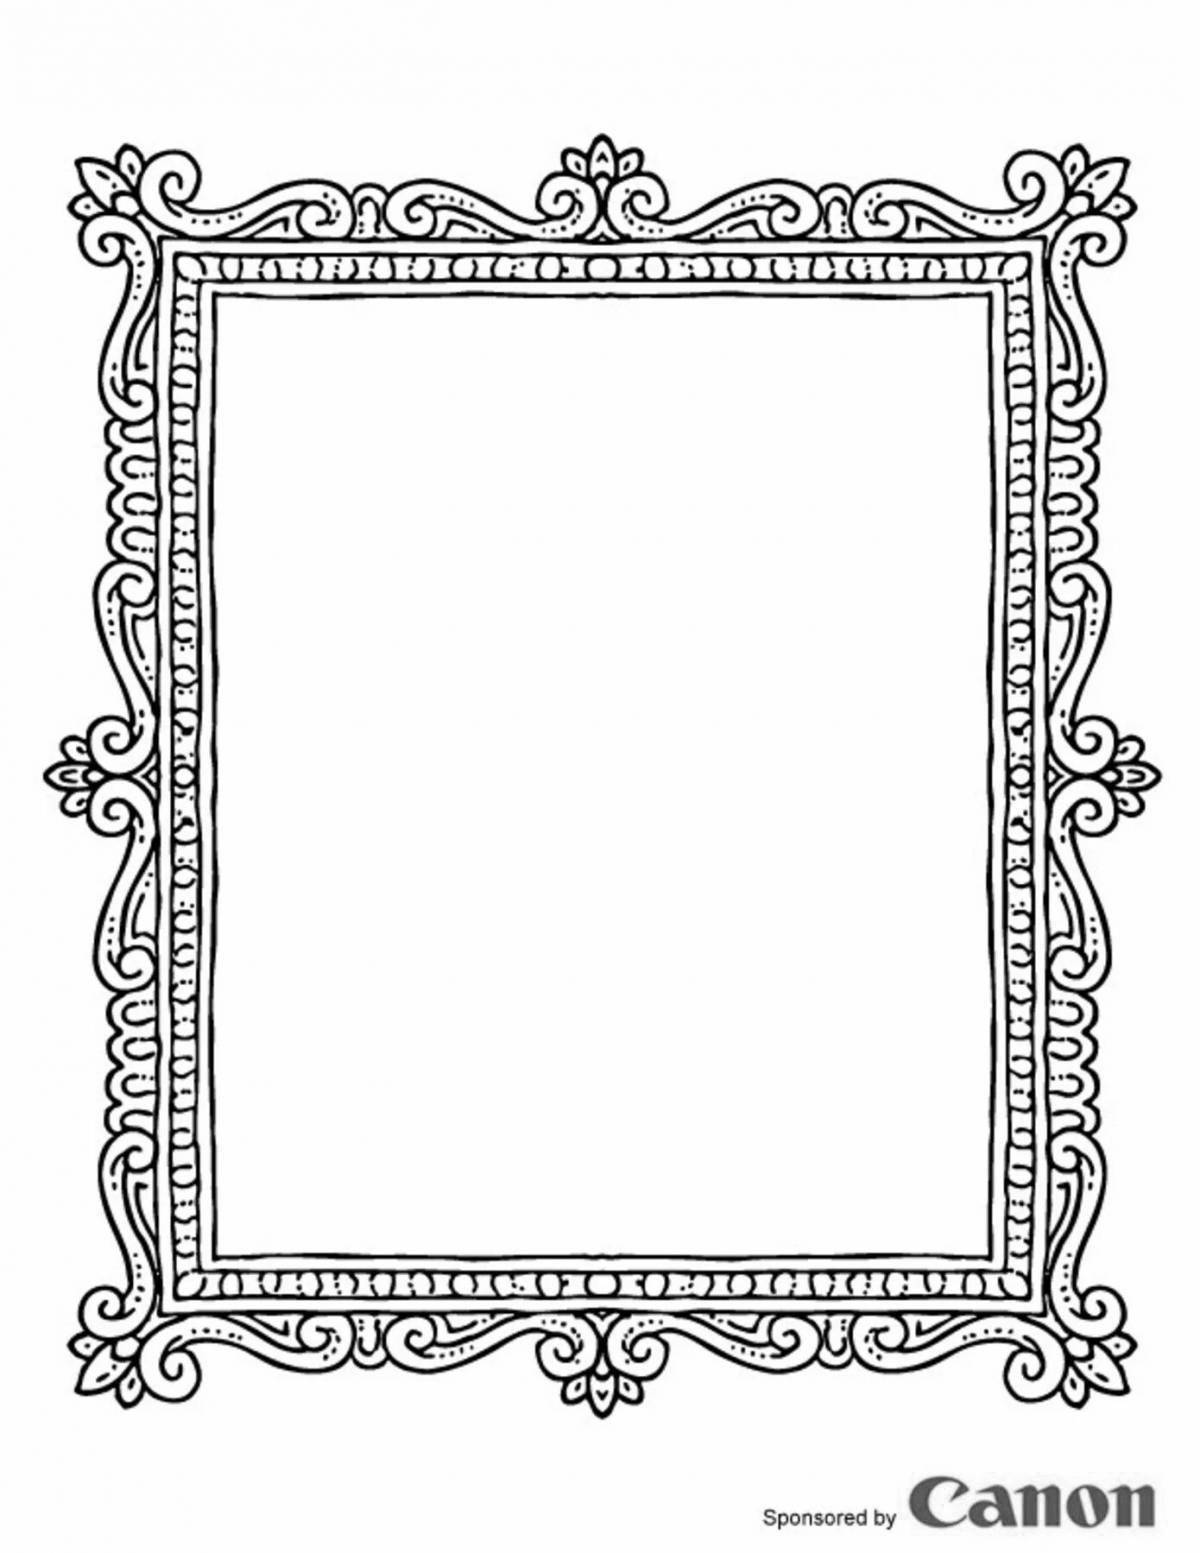 Bright coloring frame